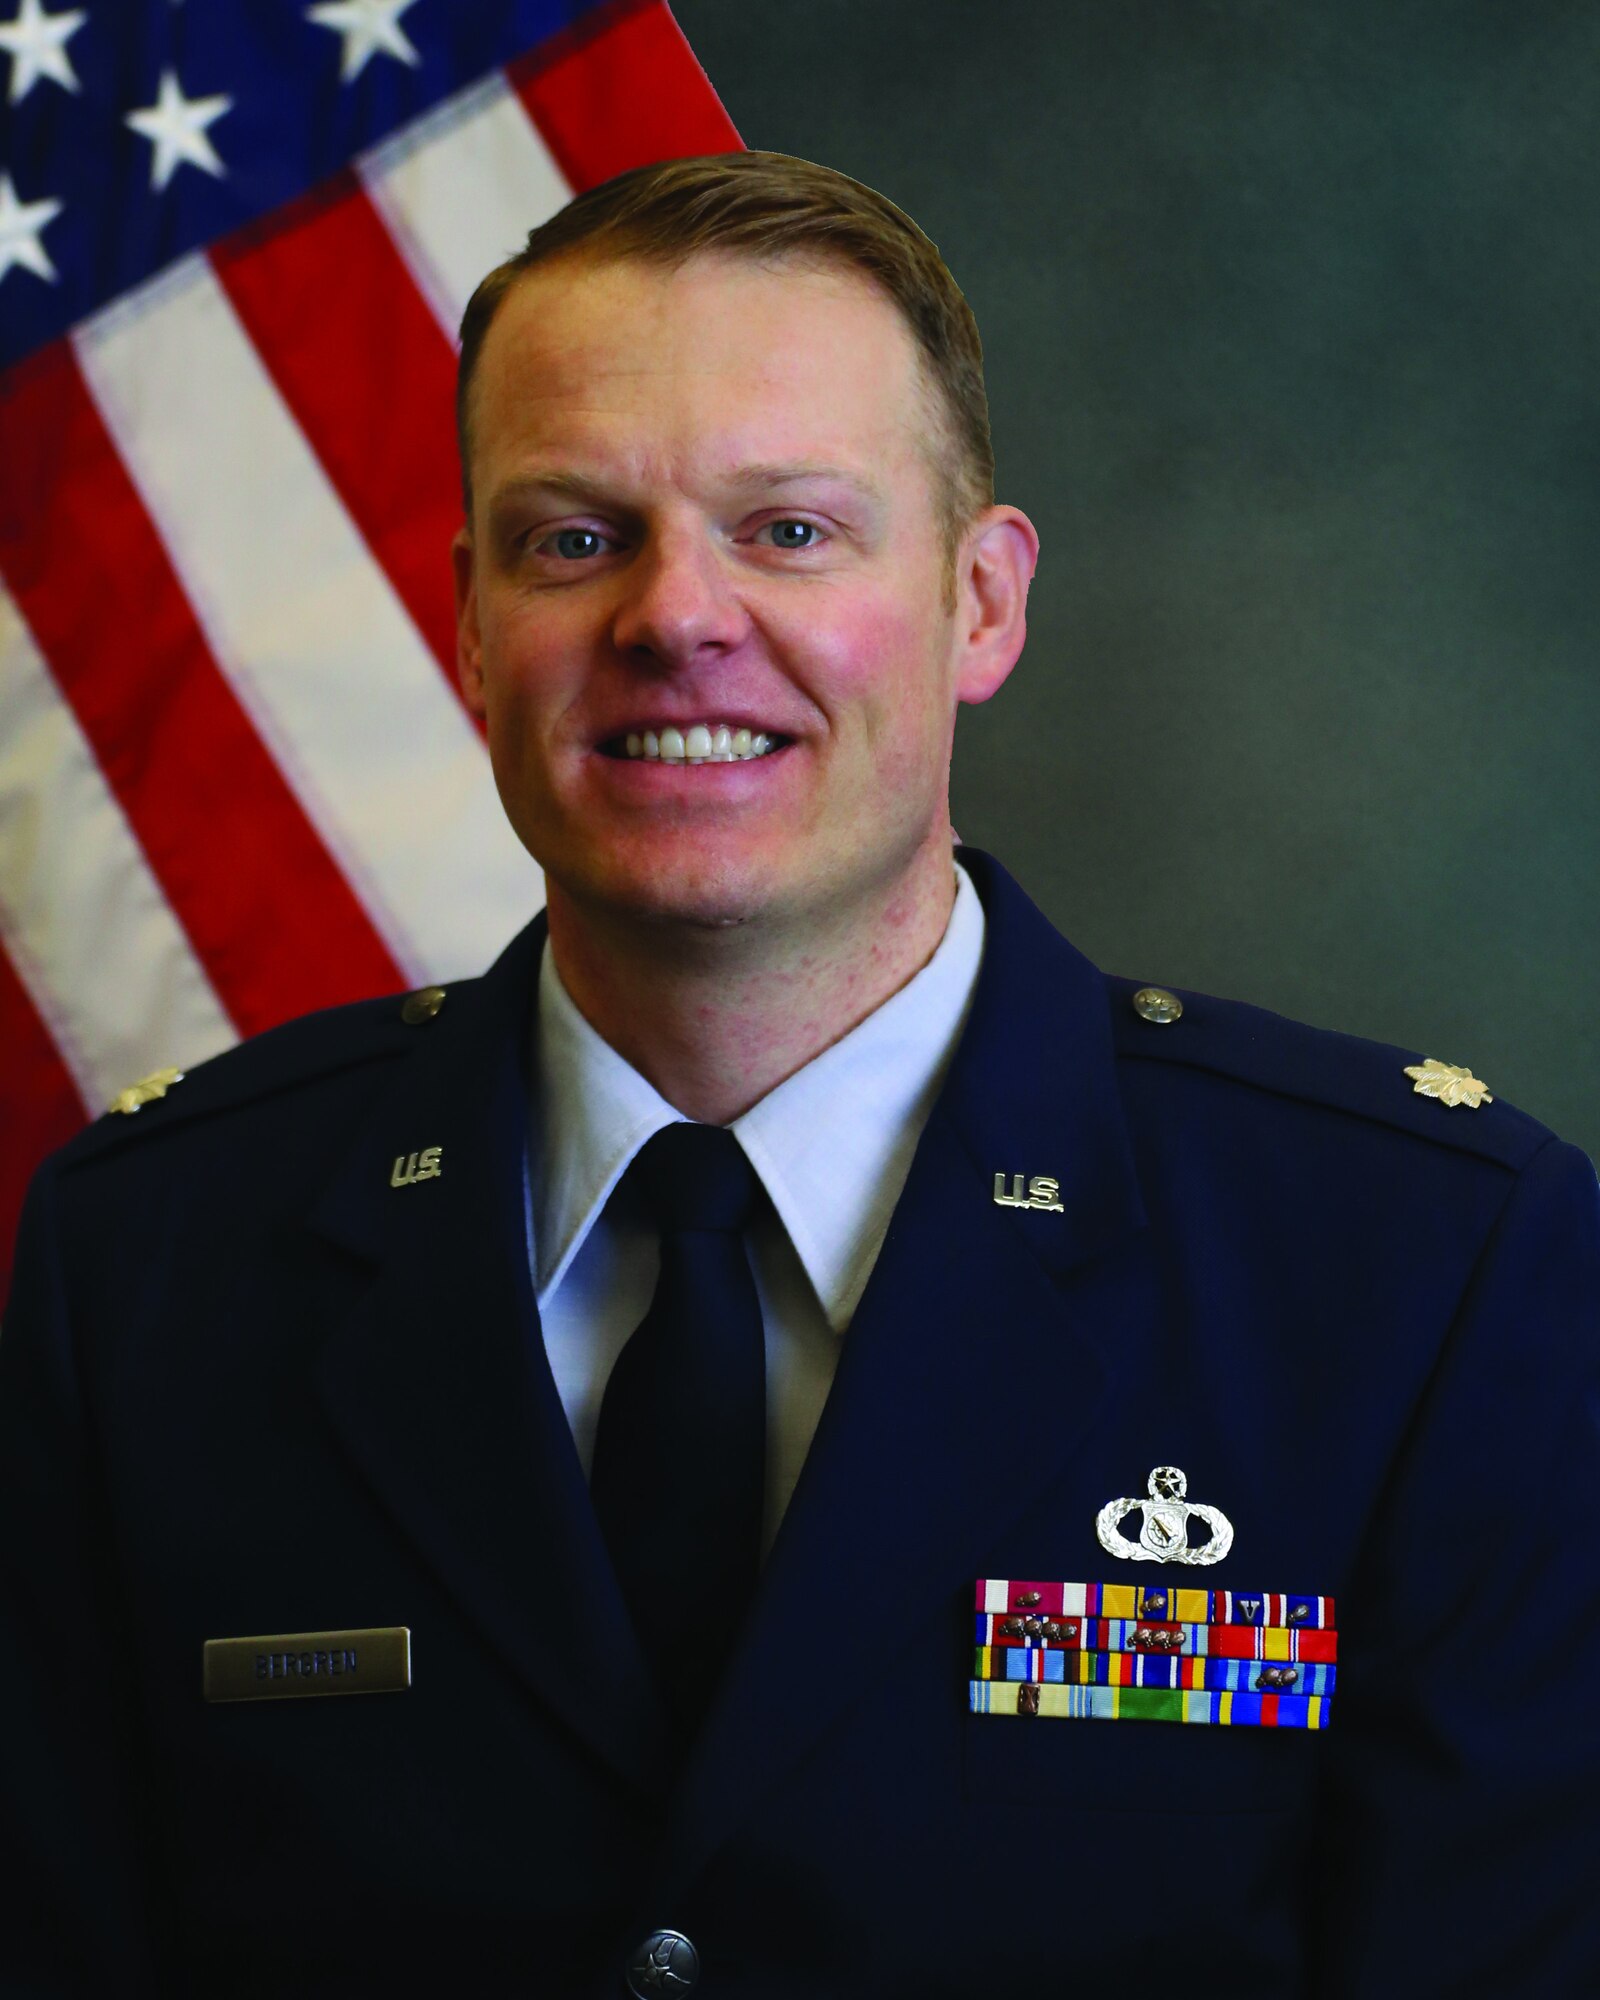 Lt. Col. Brian A. Bergren is the 225th Air Defense Squadron commander, Joint Base Lewis-McChord, Washington